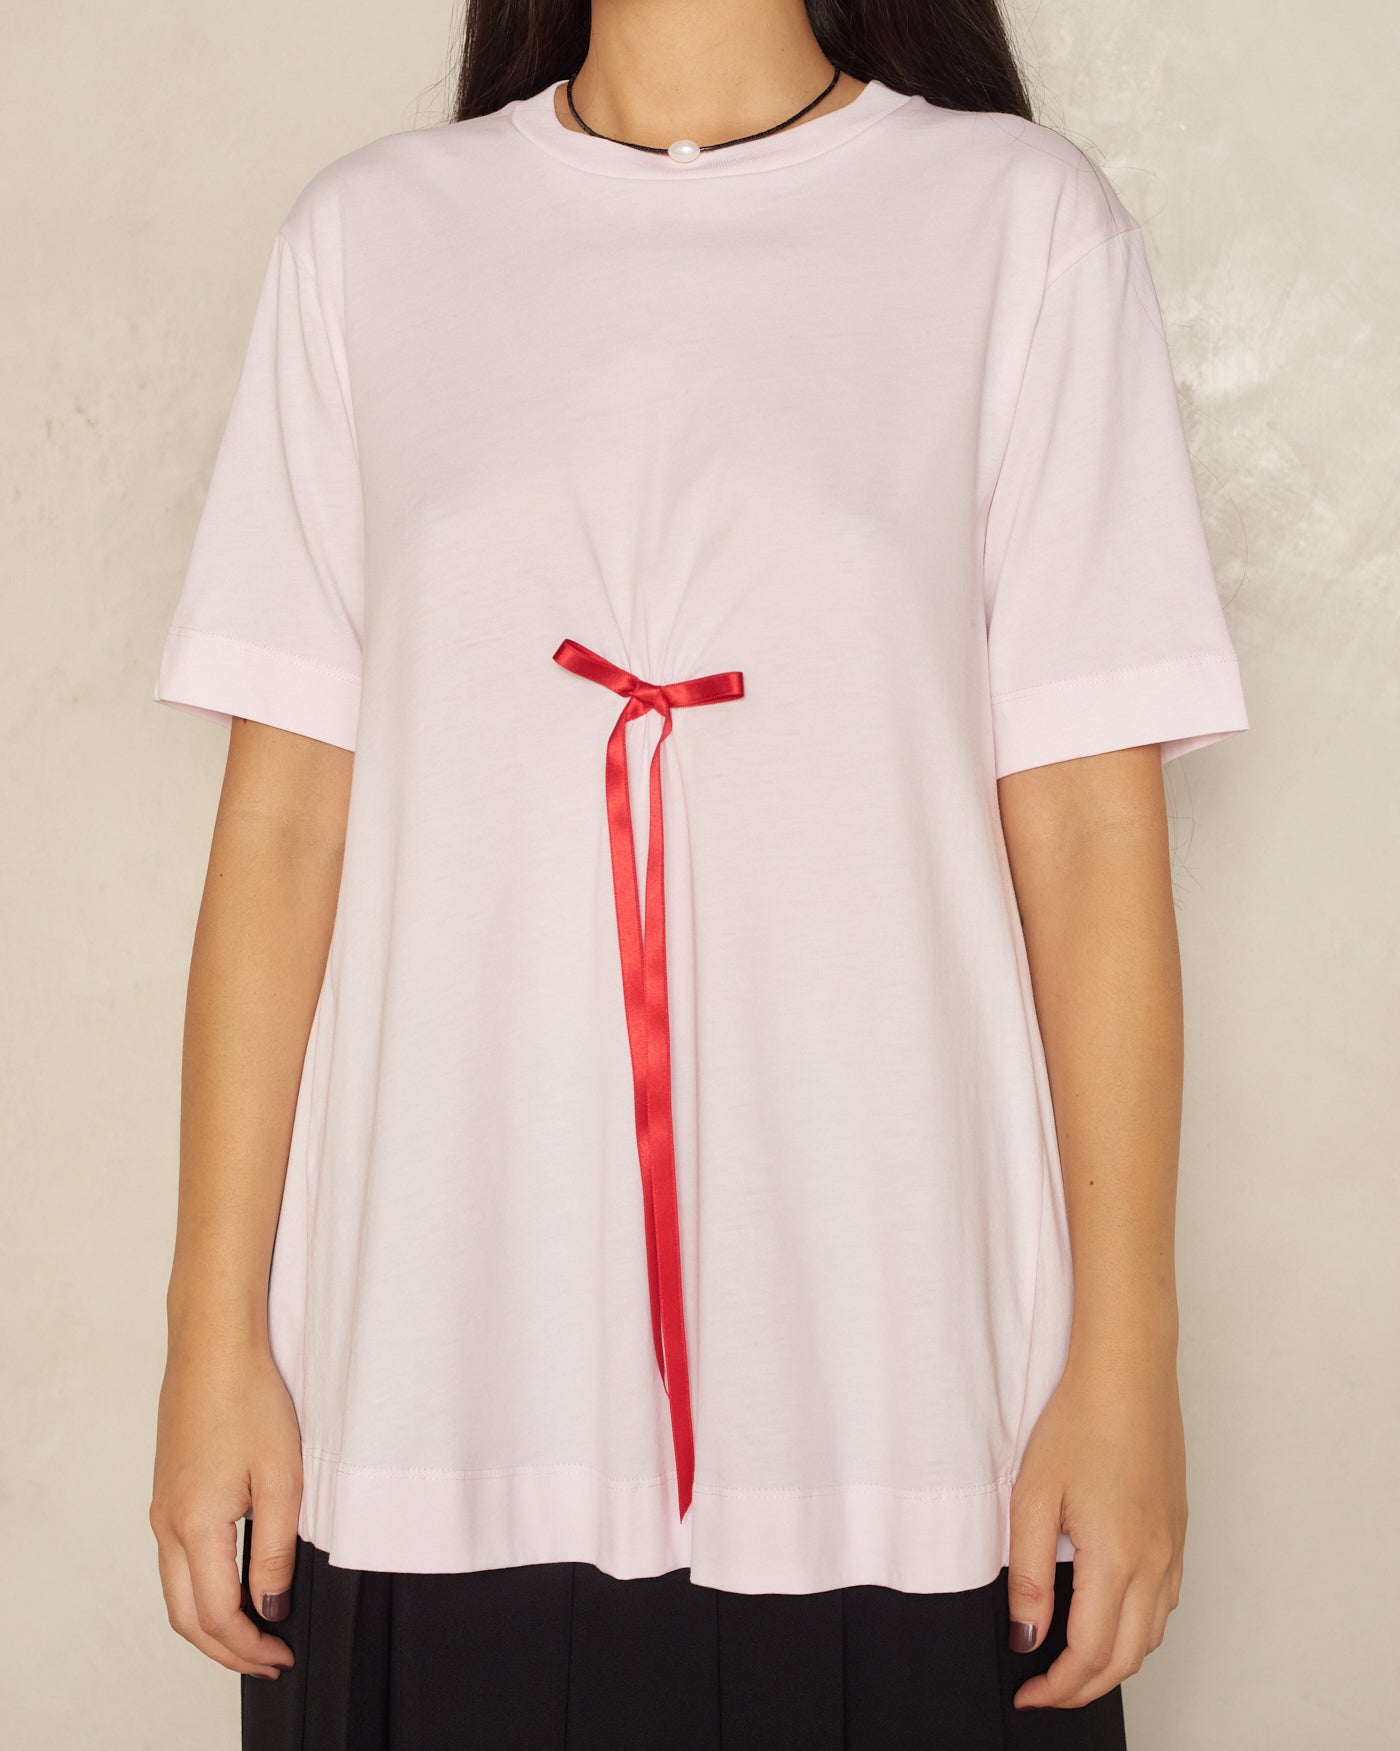 Pink T-Shirt with Red Bow